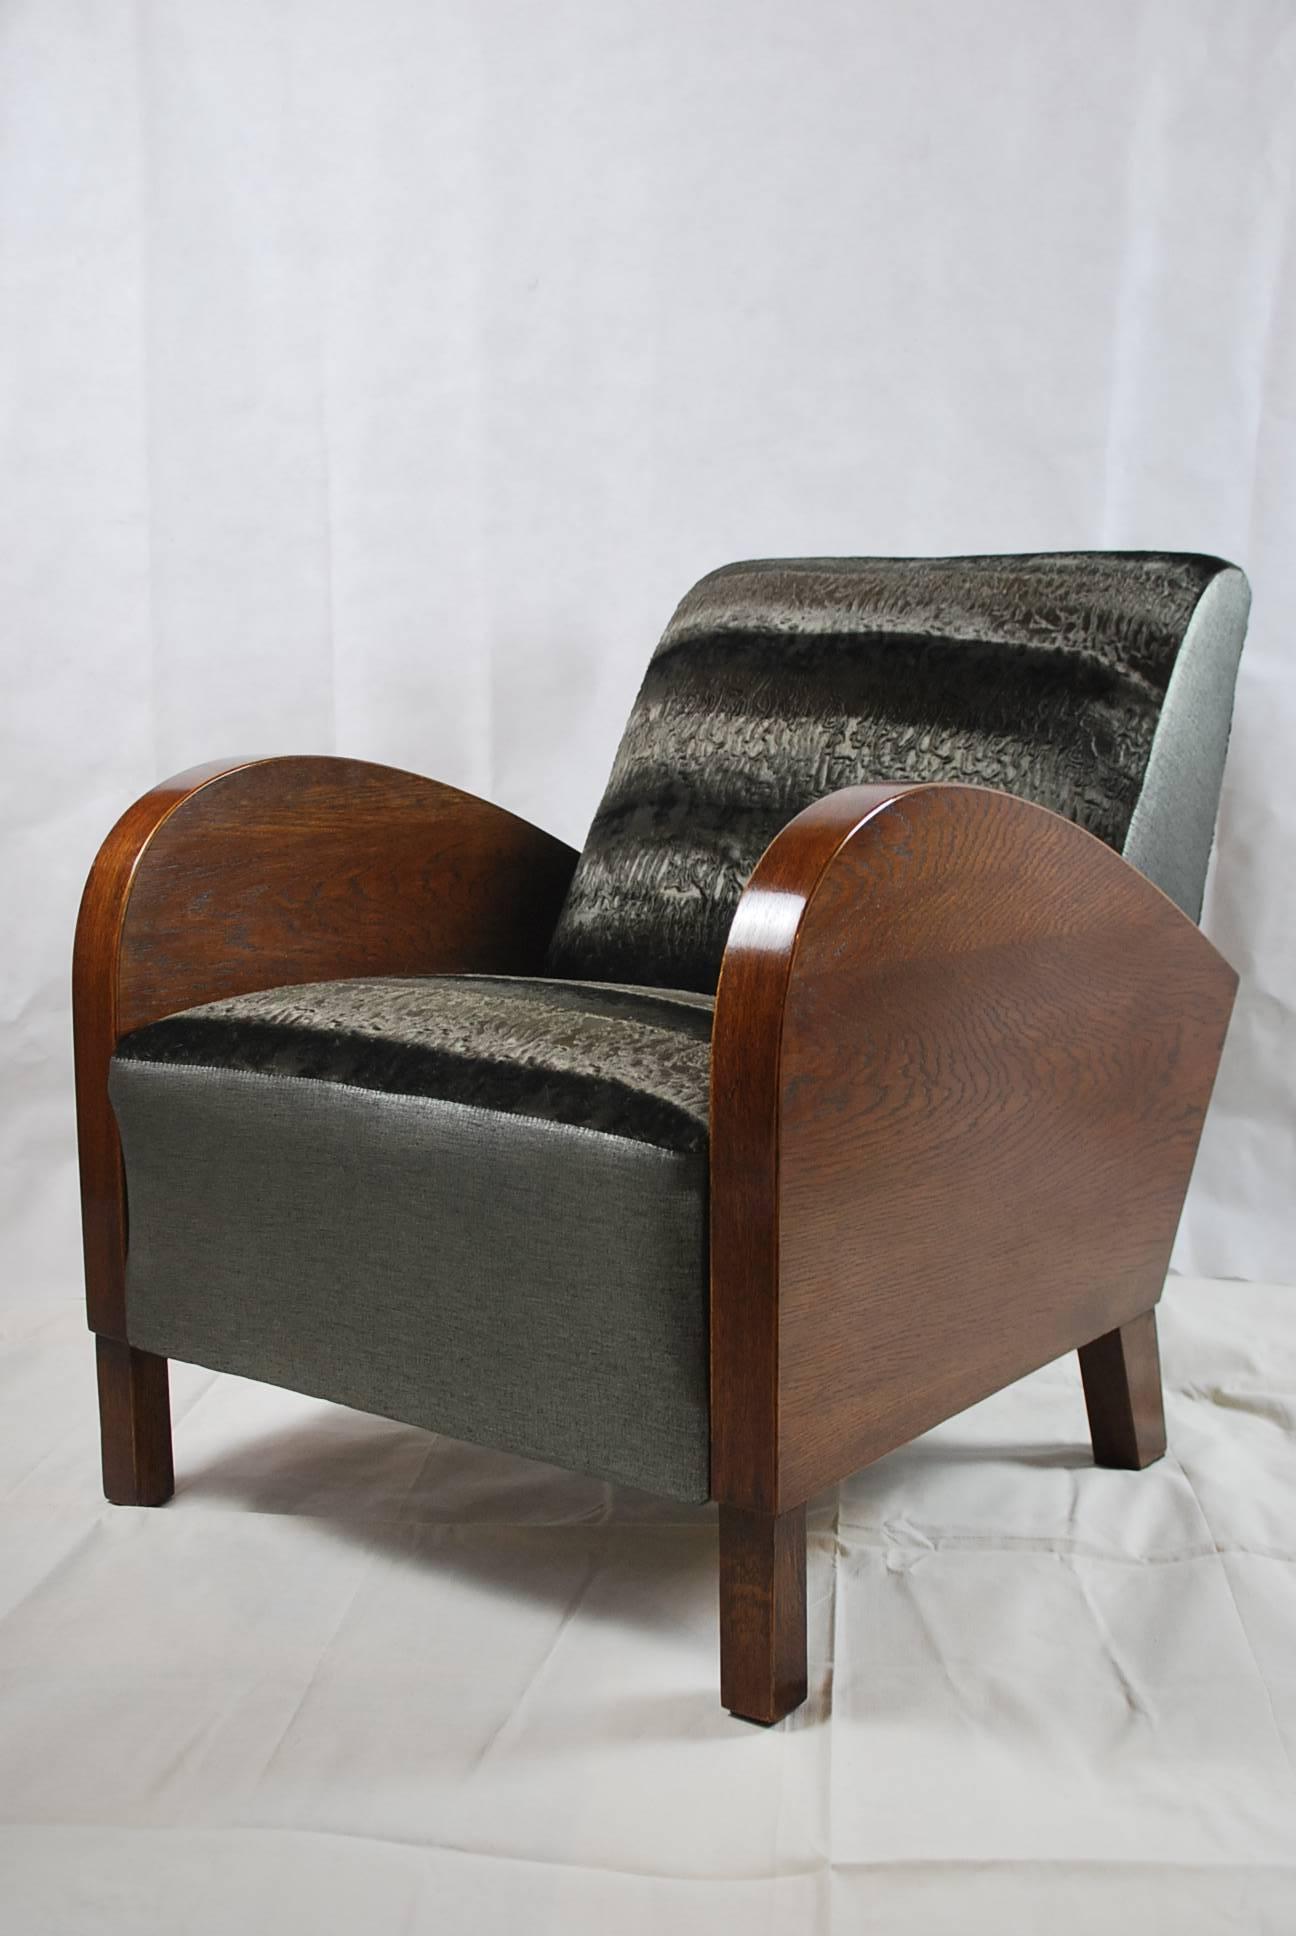 Custom-Made circa 1950s for Director of One of the Olomouc Company, Czech For Sale 3